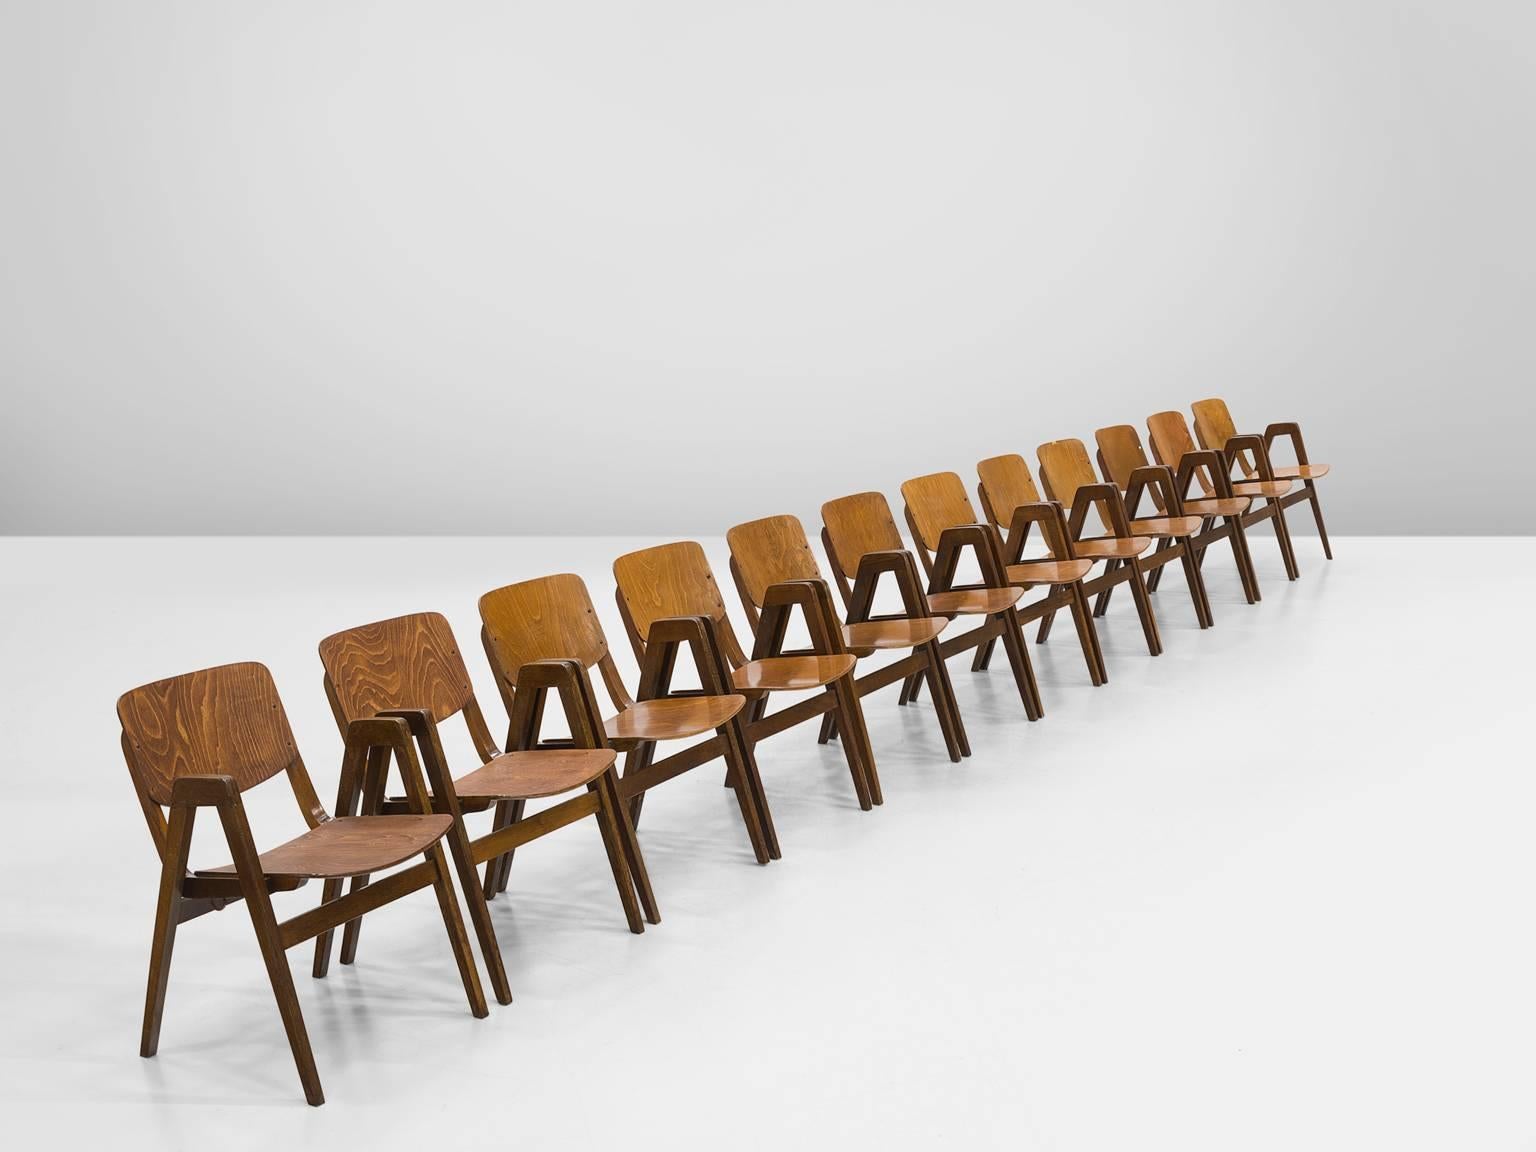 Thonet, set of twelve armchairs, in beech, 1960s.

Set of twelve bended plywood armchairs in a warm patinated beech. These chairs were designed by for the famous bentwood manufacturer Thonet. The most interesting detail in these chairs is the